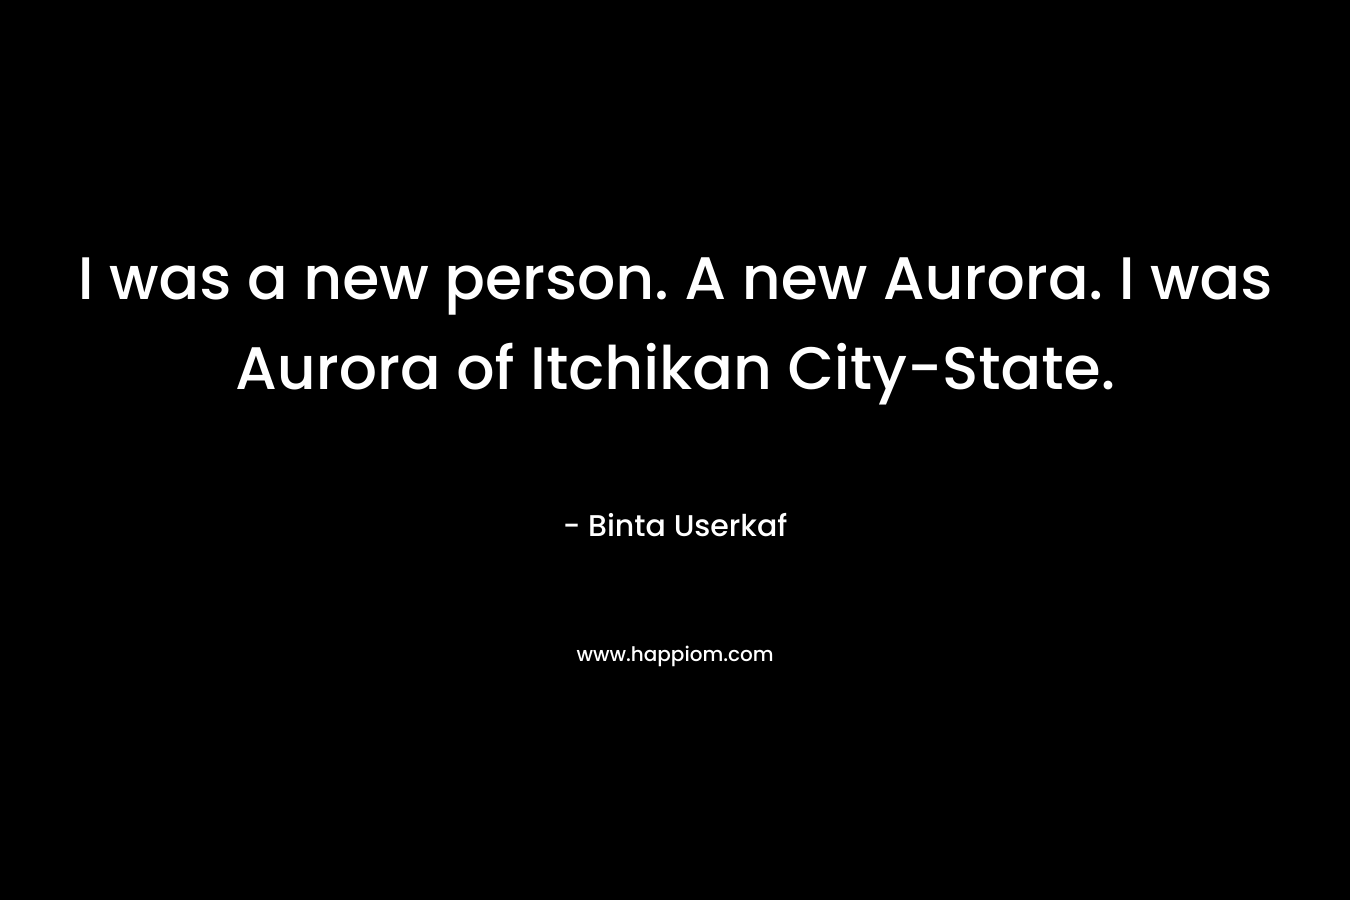 I was a new person. A new Aurora. I was Aurora of Itchikan City-State.